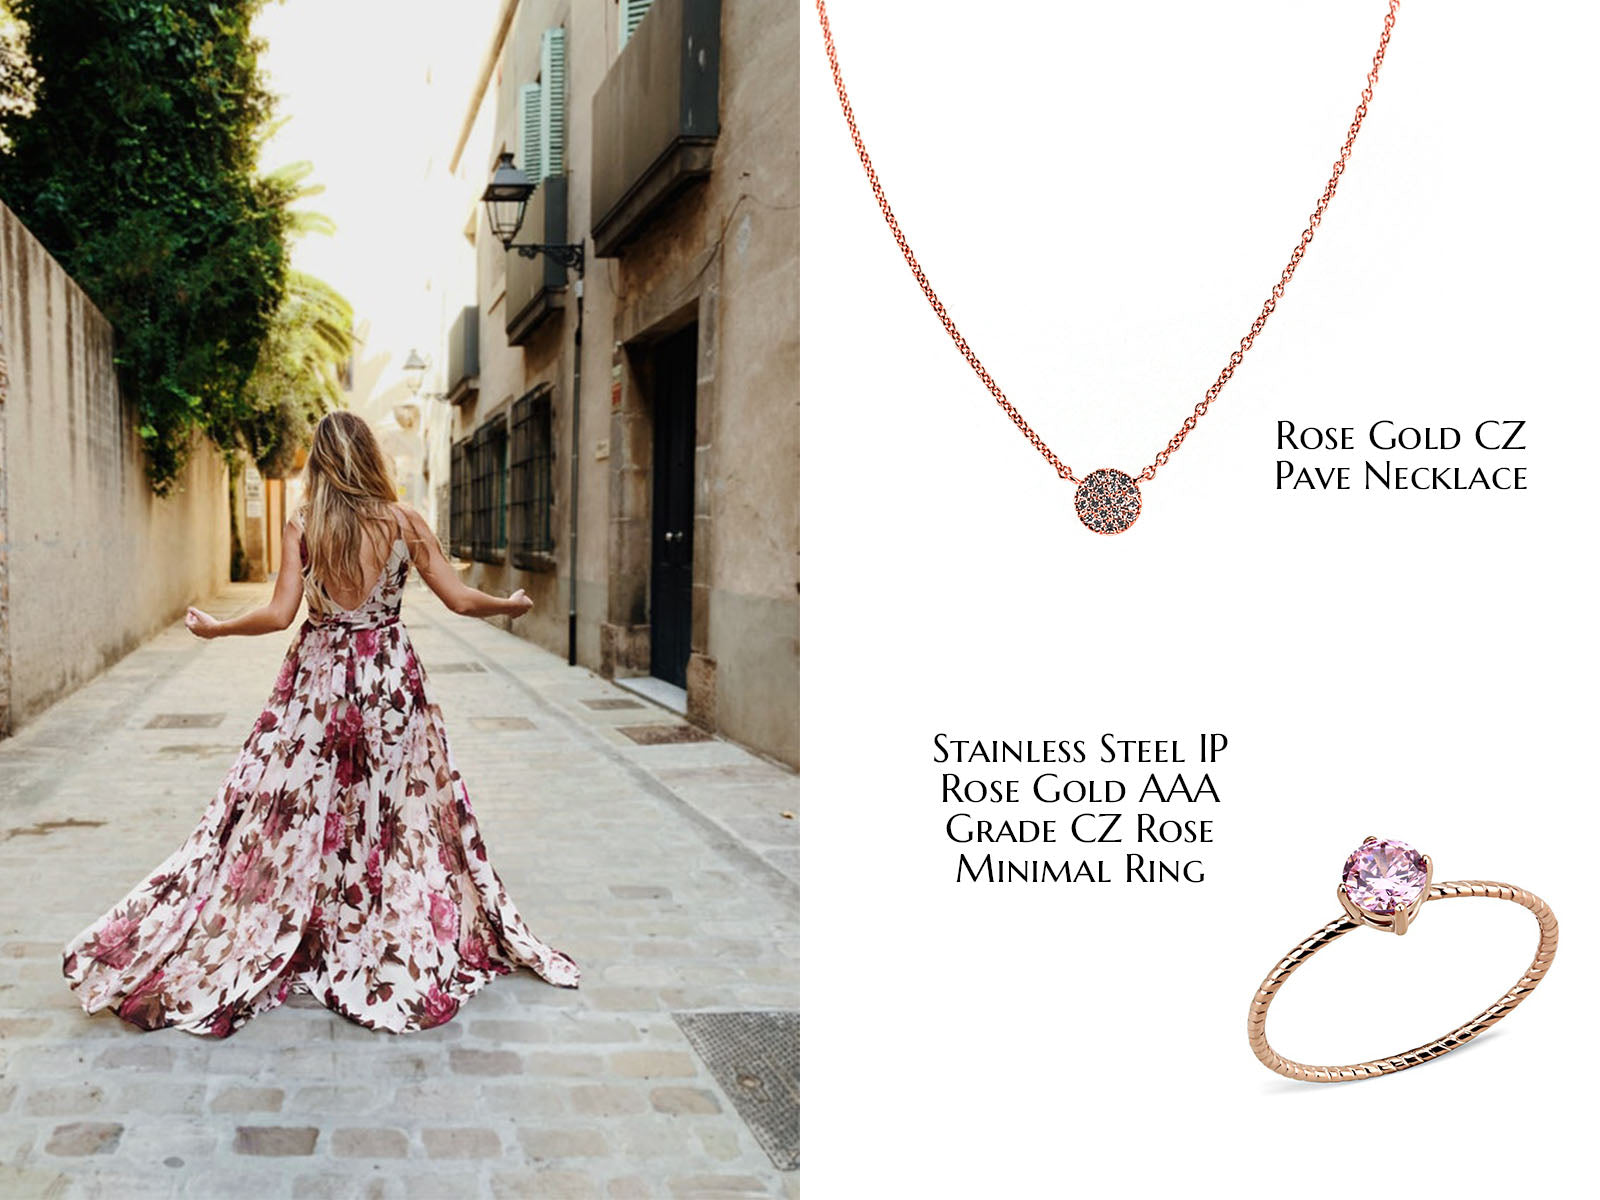 Woman in pink and white floral dress on one side of the photo, and CeriJewelry Rose Gold CZ Pave Necklace and Stainless Steel IP Rose Gold AAA Grade CZ Rose Minimal Ring on the other side